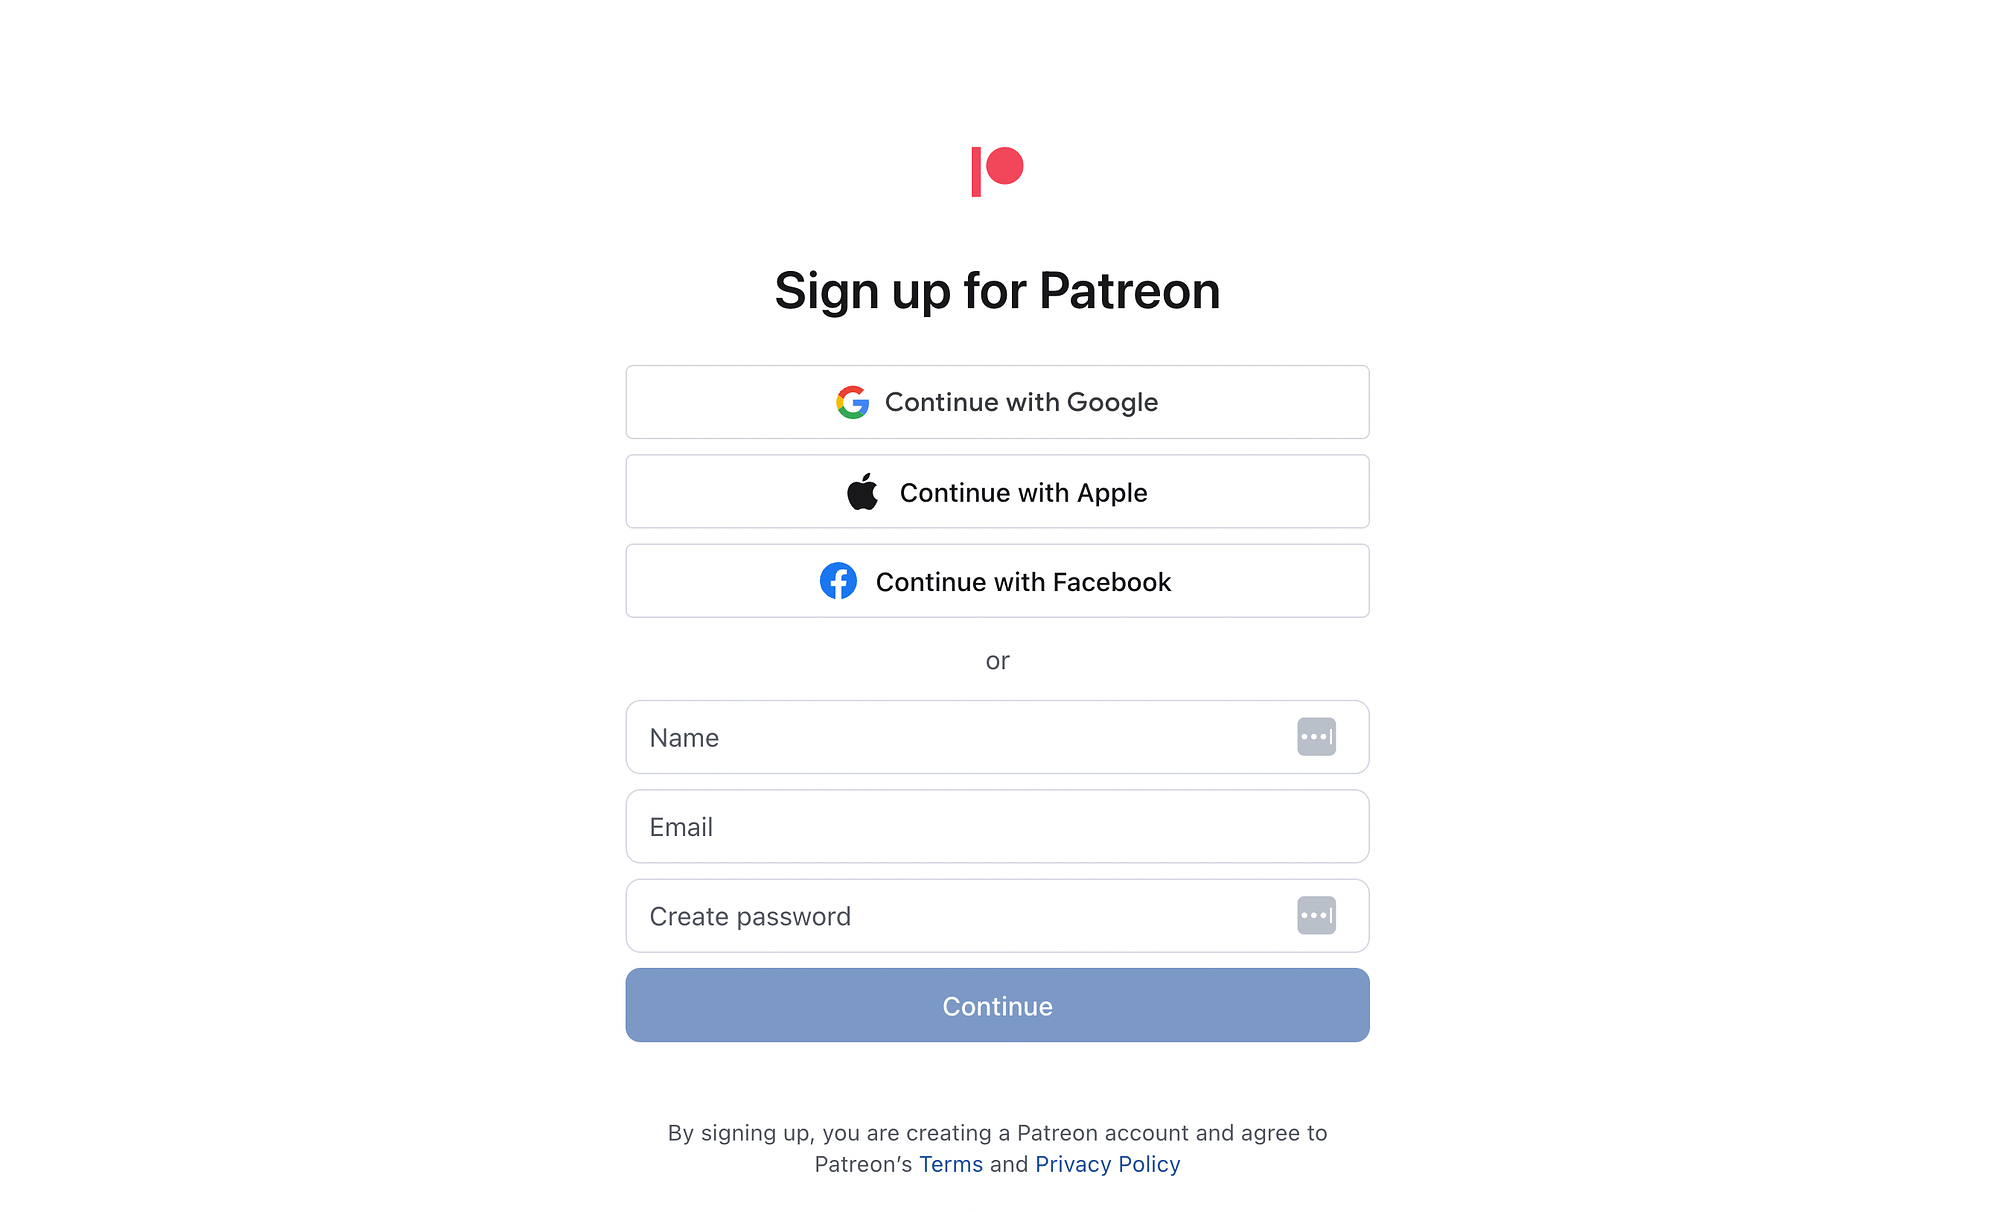 Sign up for Patreon.